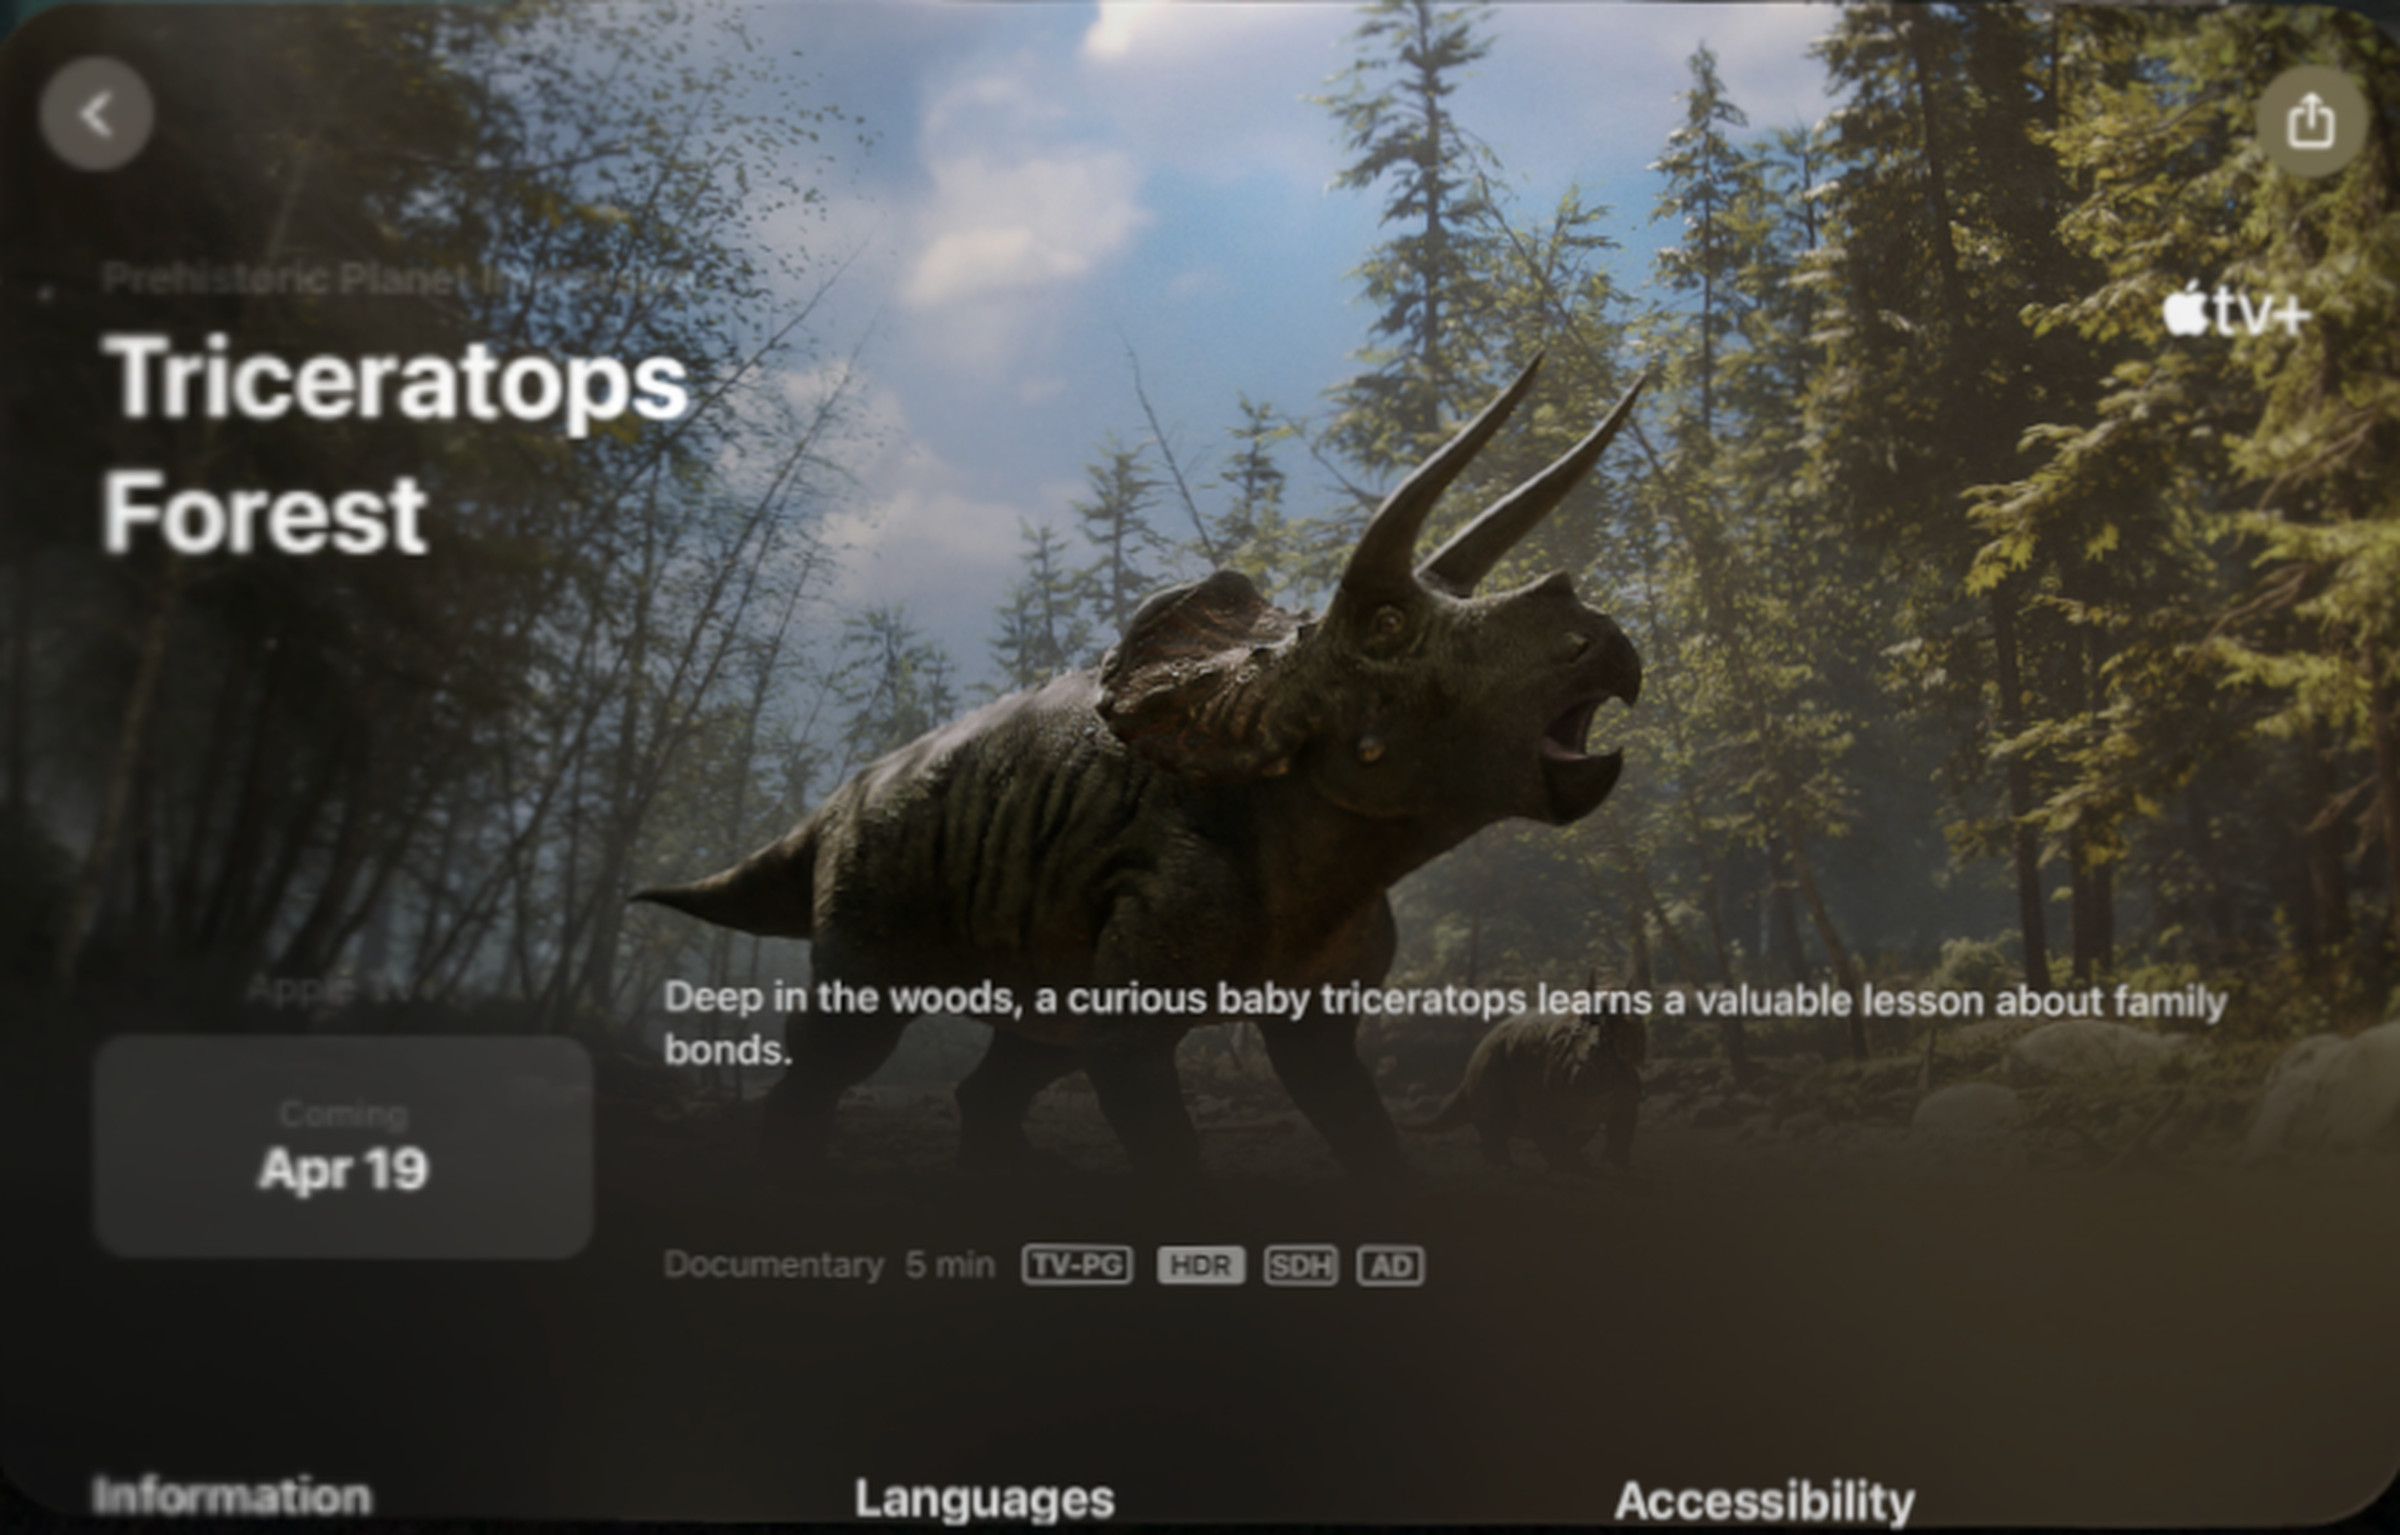 A screenshot of the episode page for Triceratops Forest.